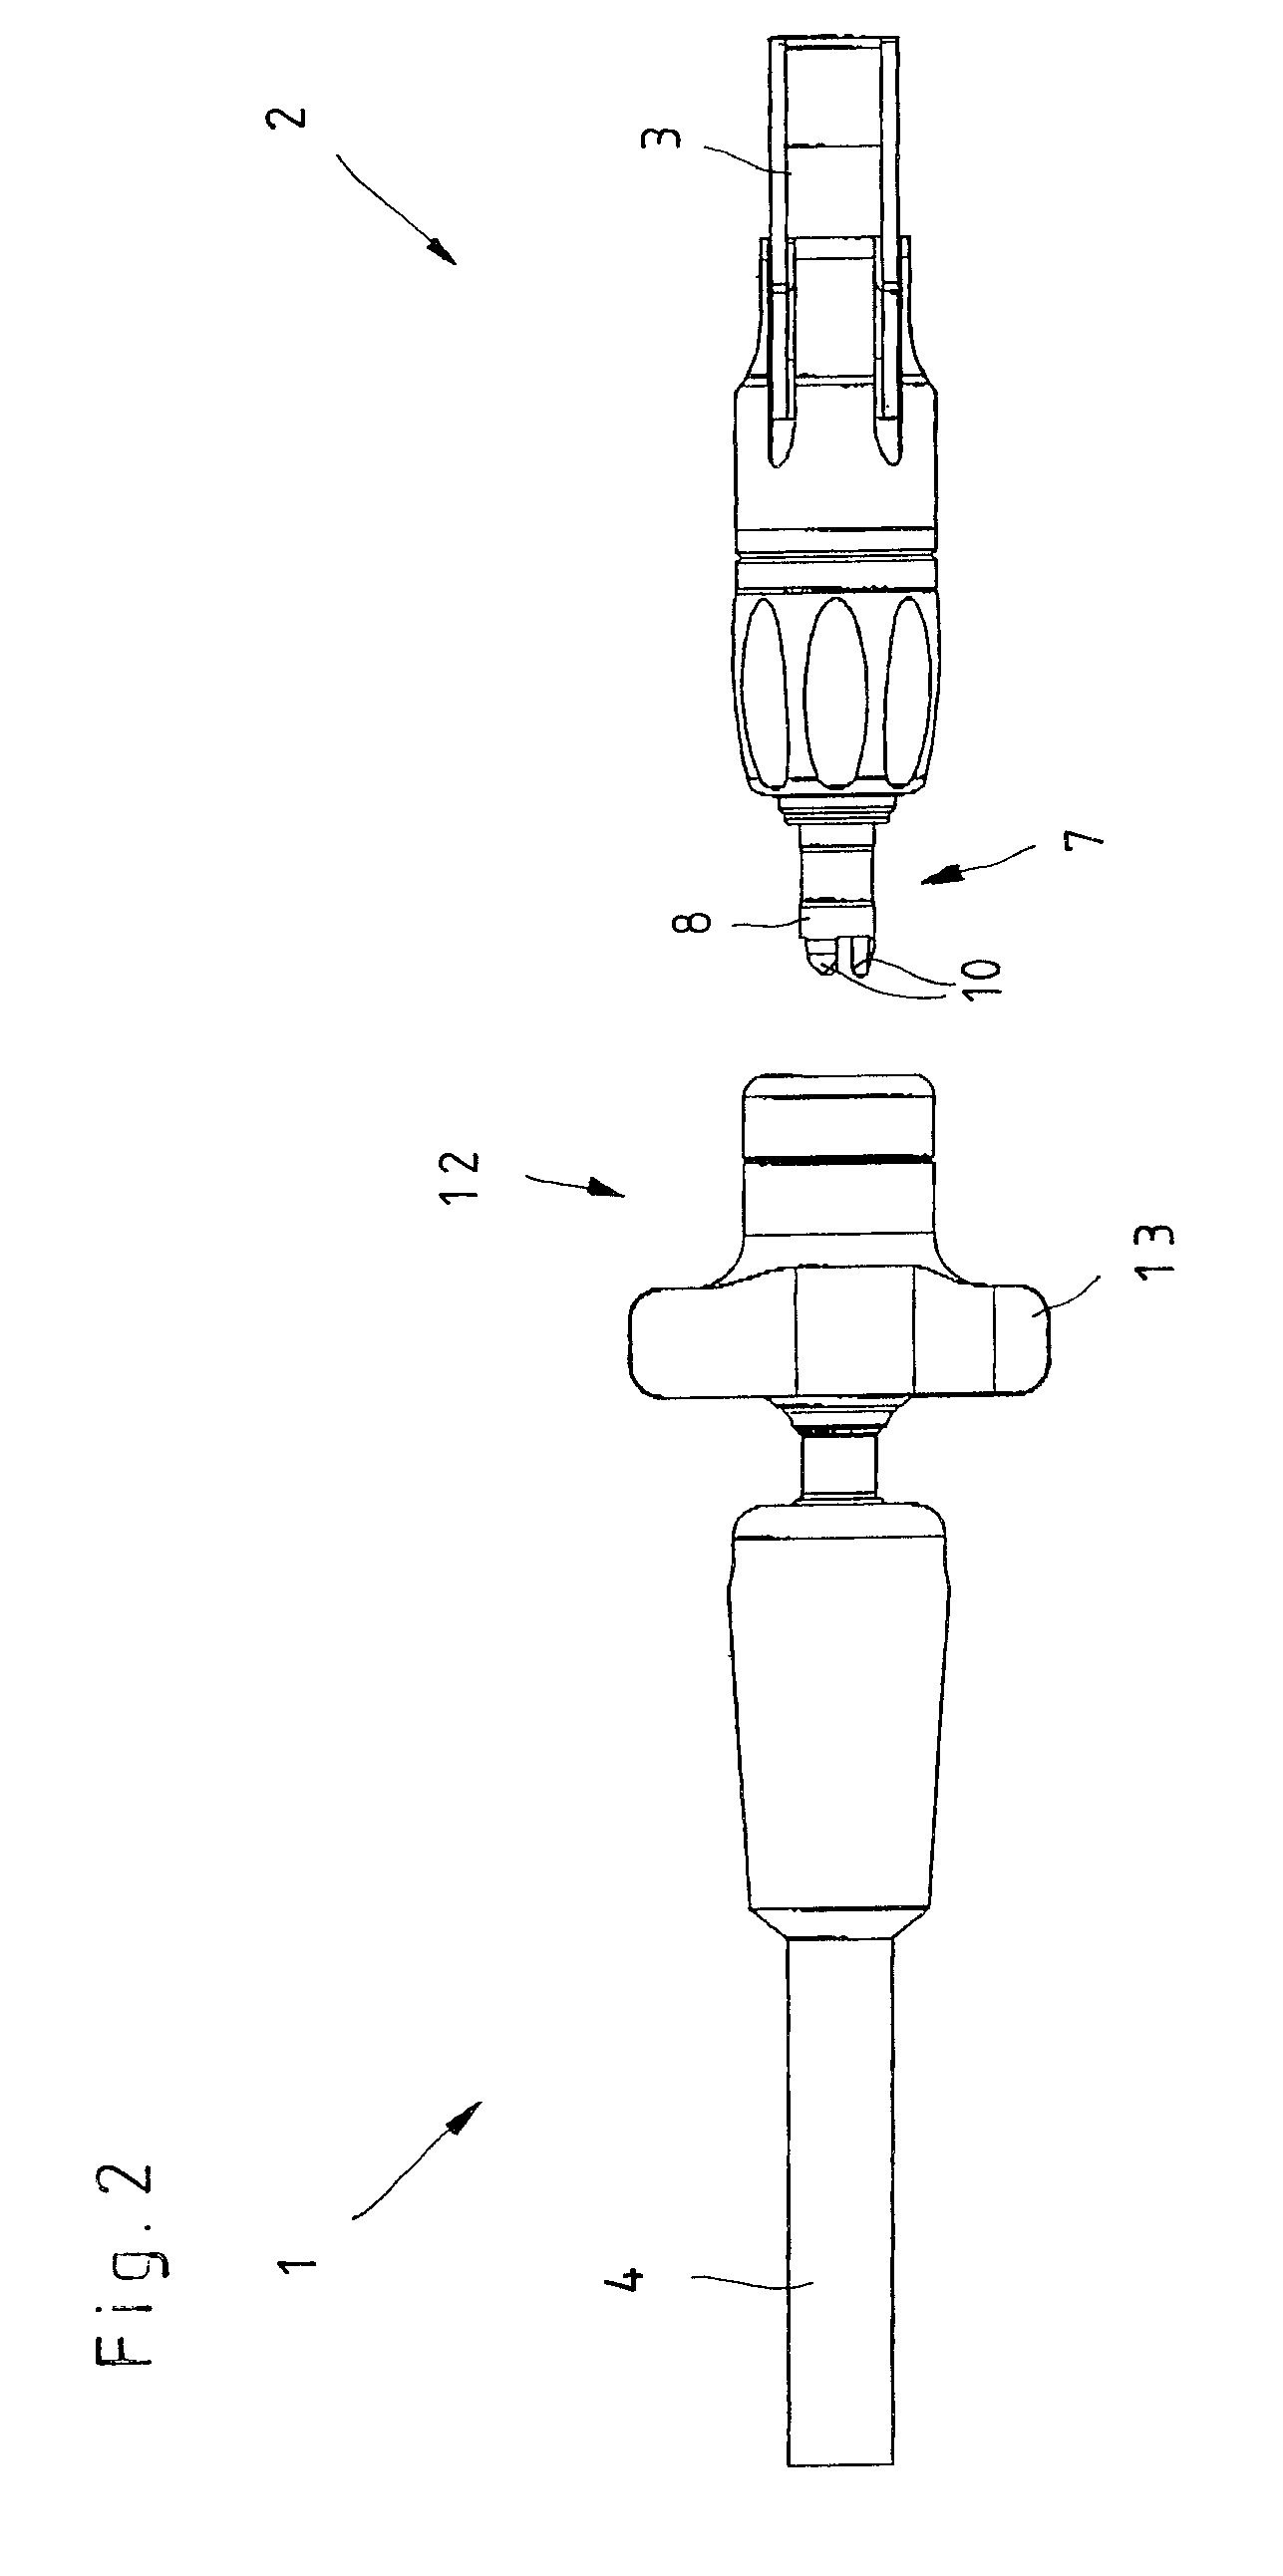 Coupling device for attaching medical instruments to a holding device